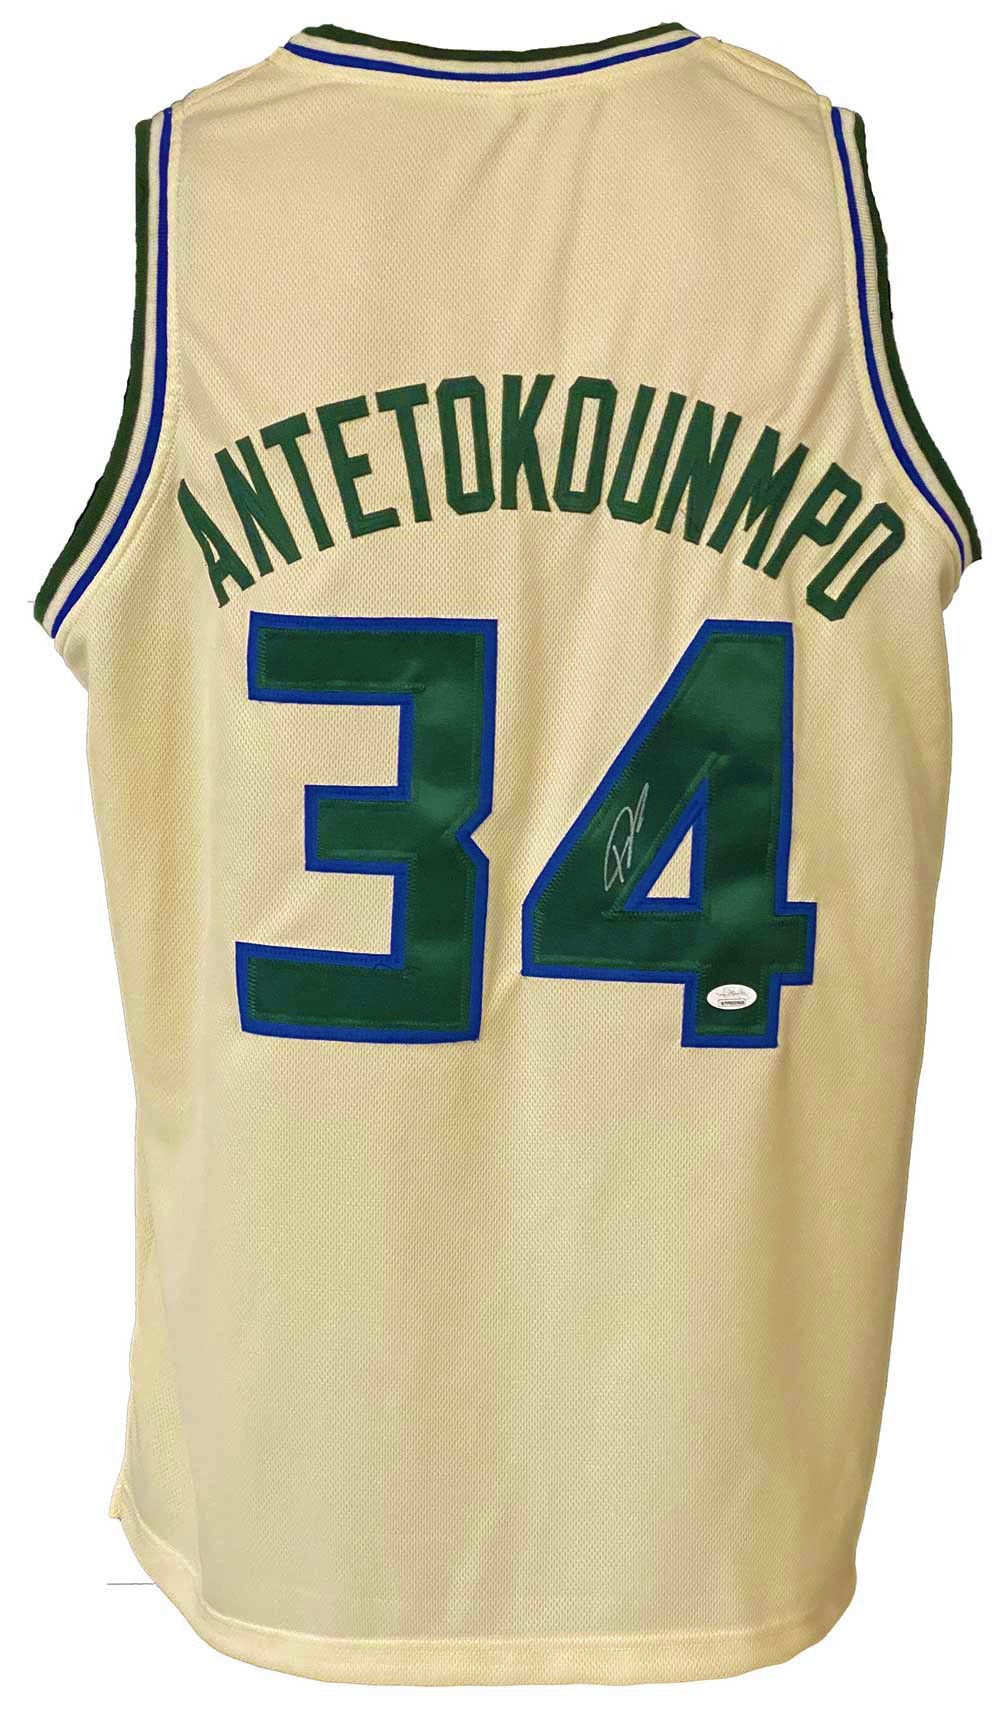 city giannis jersey